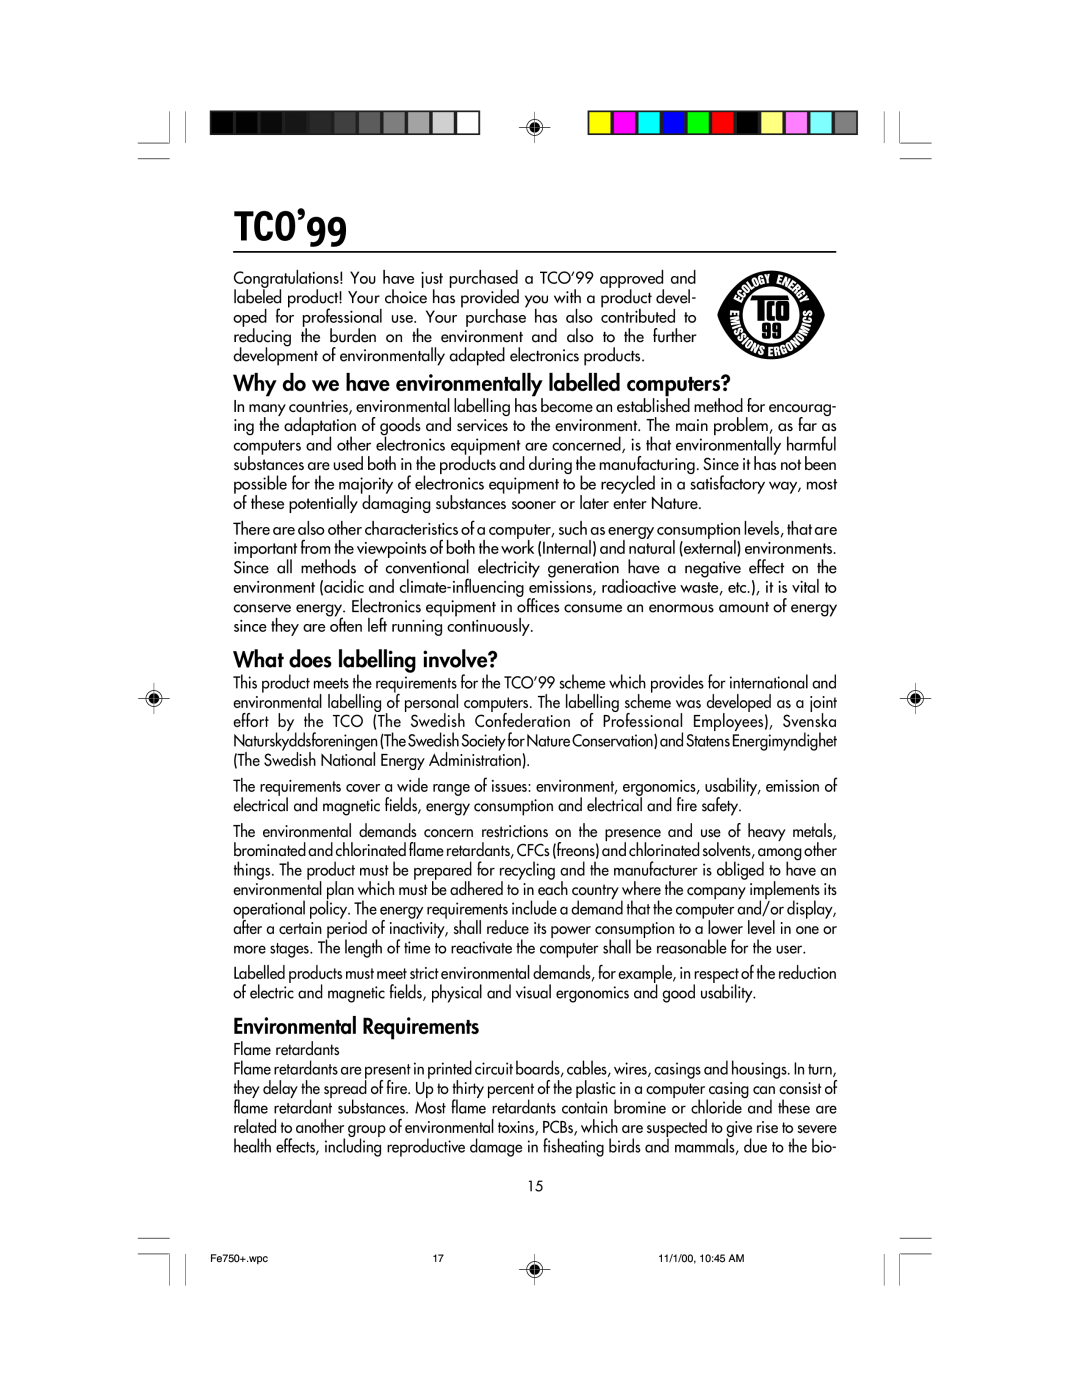 NEC FE750 Plus user manual TCO’99, Why do we have environmentally labelled computers?, What does labelling involve? 